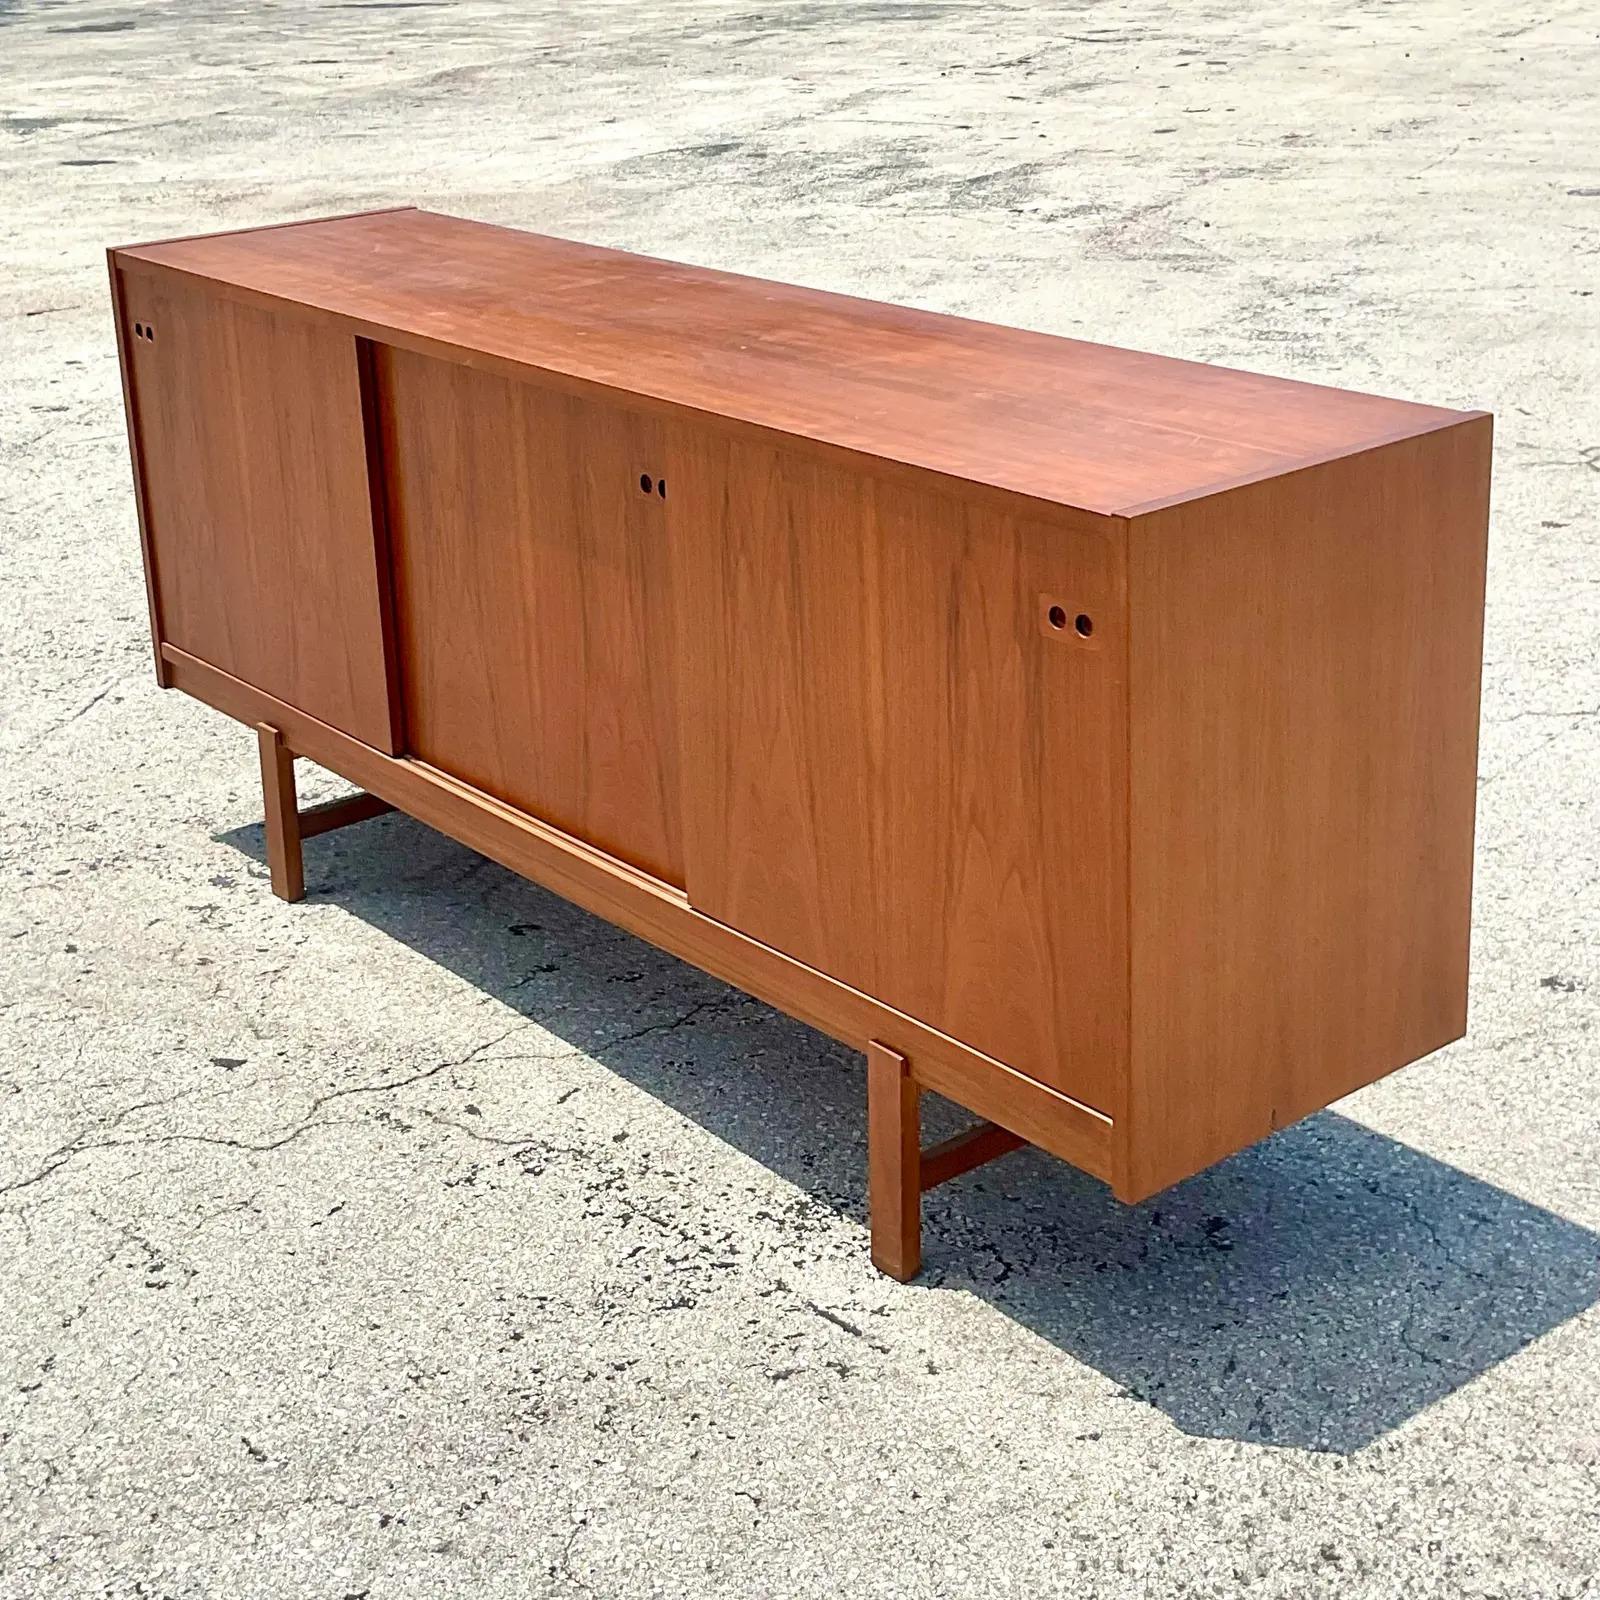 A vintage Midcentury Danish teak credenza. Made by the iconic Kofod Larsen. Beautiful wood grain detail with three sliding doors. Two sections with open shelving and a center section with sliding drawers. Unmarked. Acquired from a Palm Beach estate.